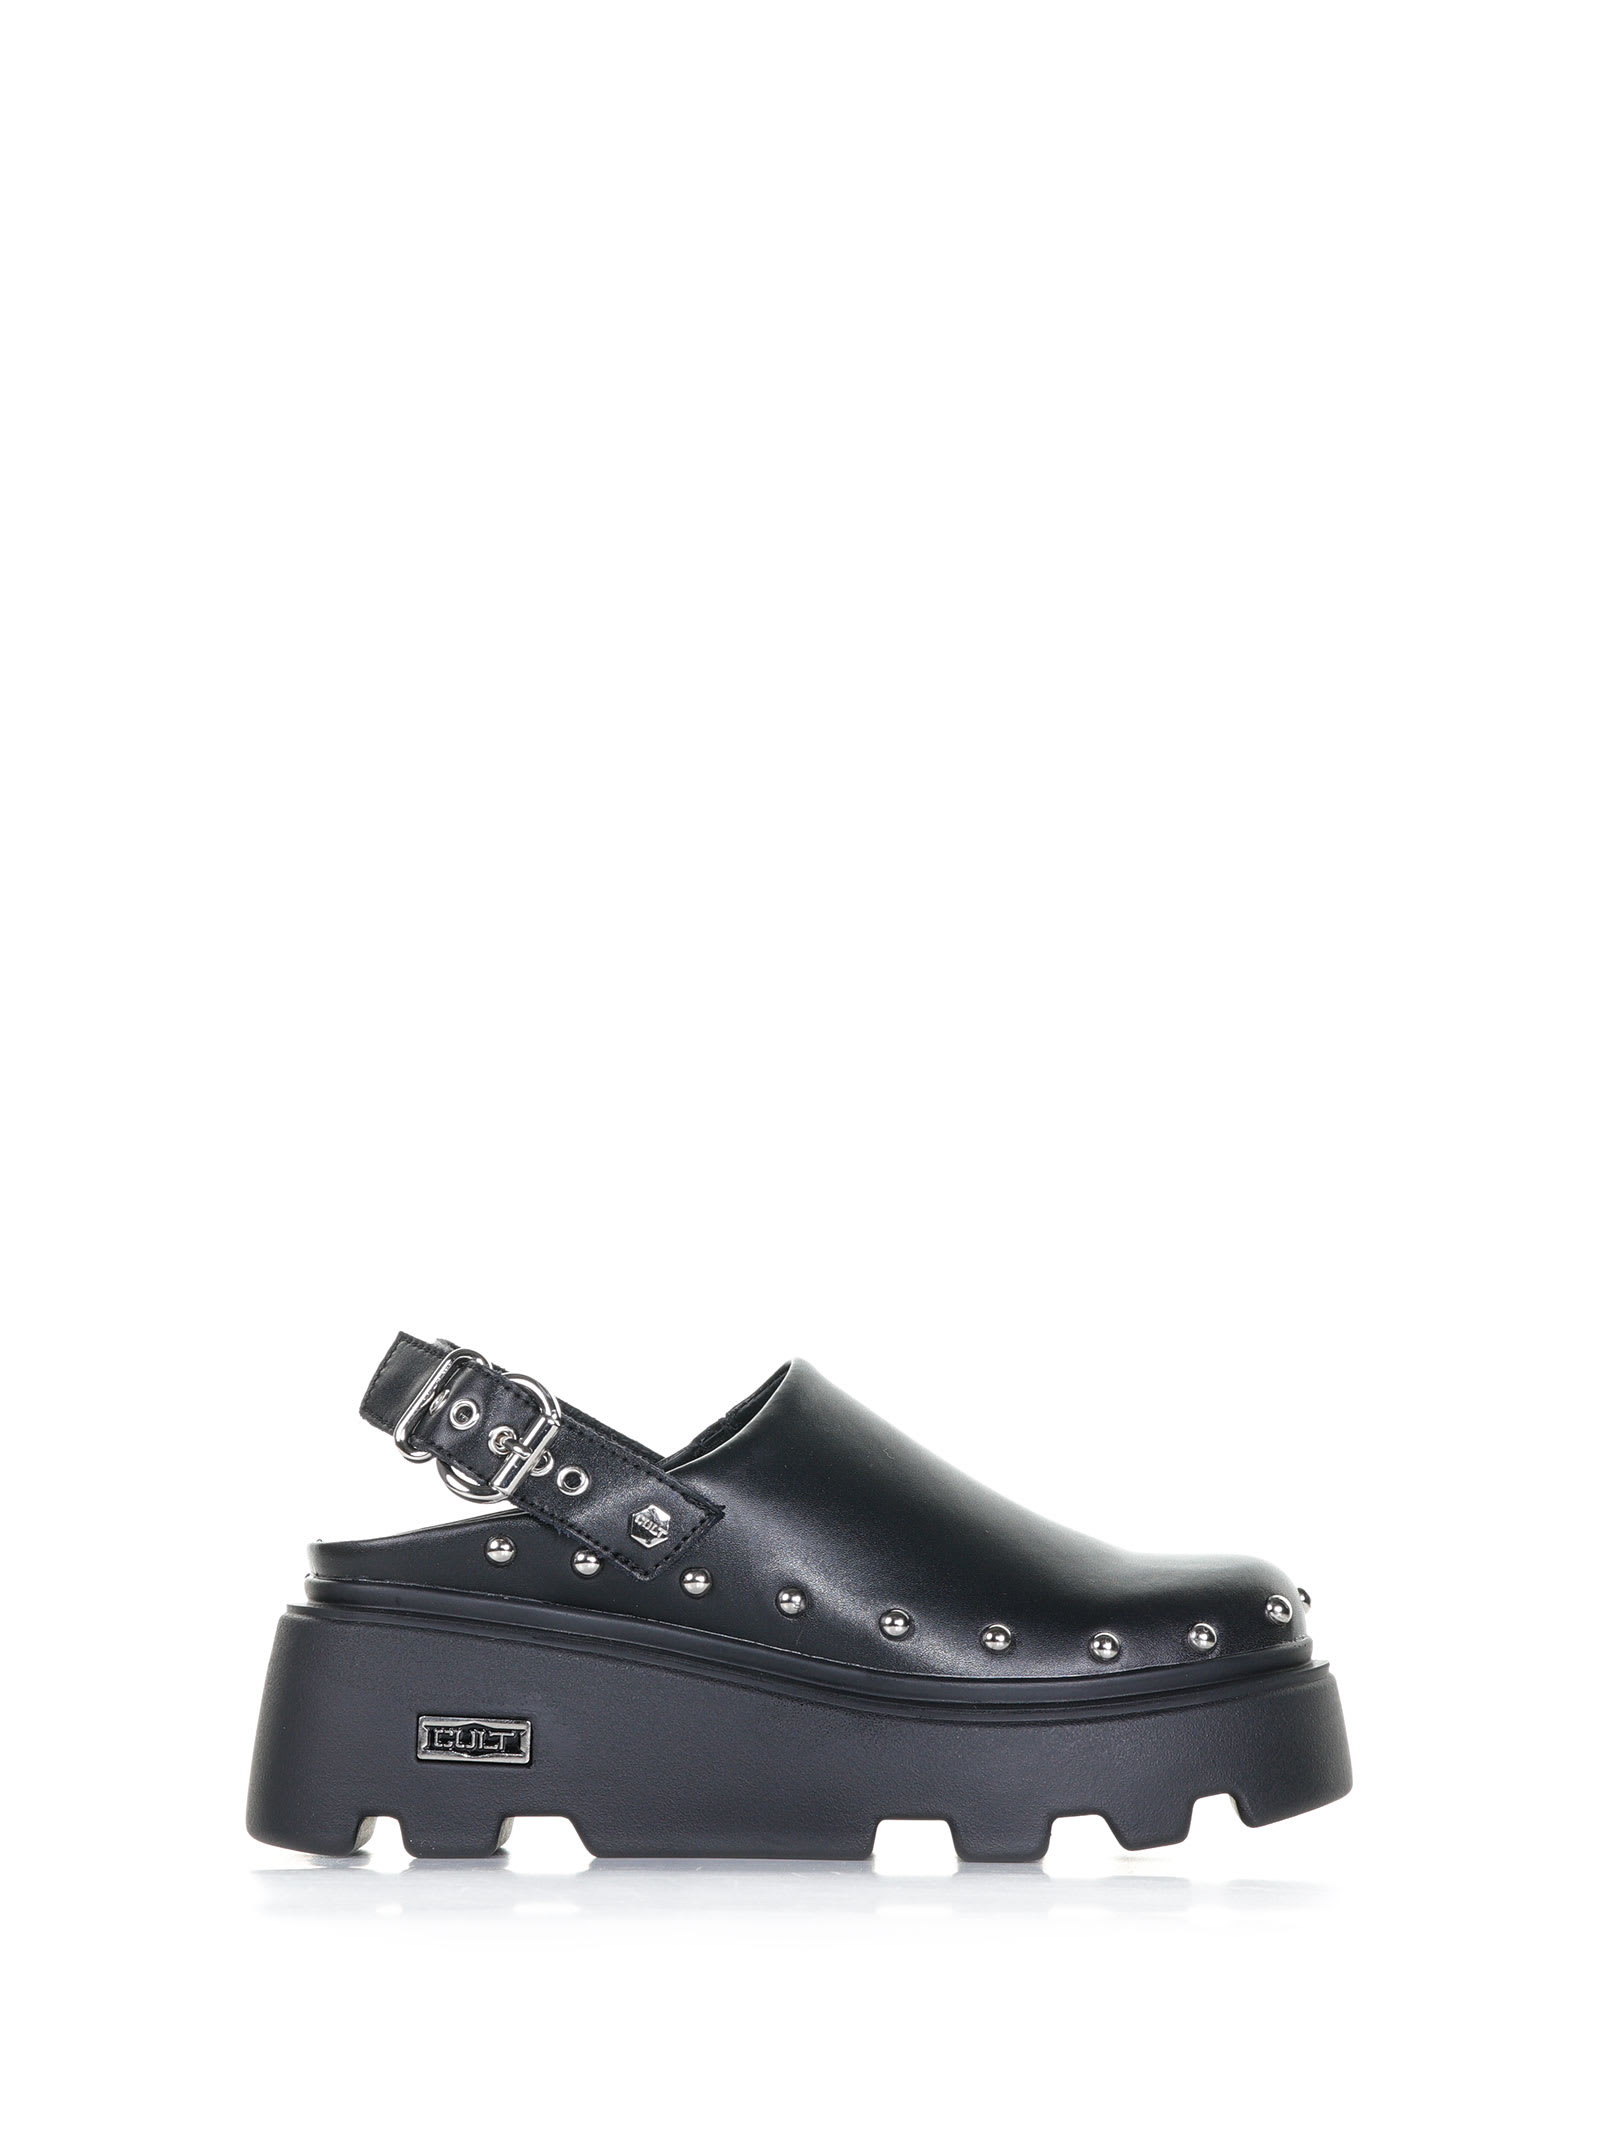 Cult New Rock 3659 Sandal With Studs